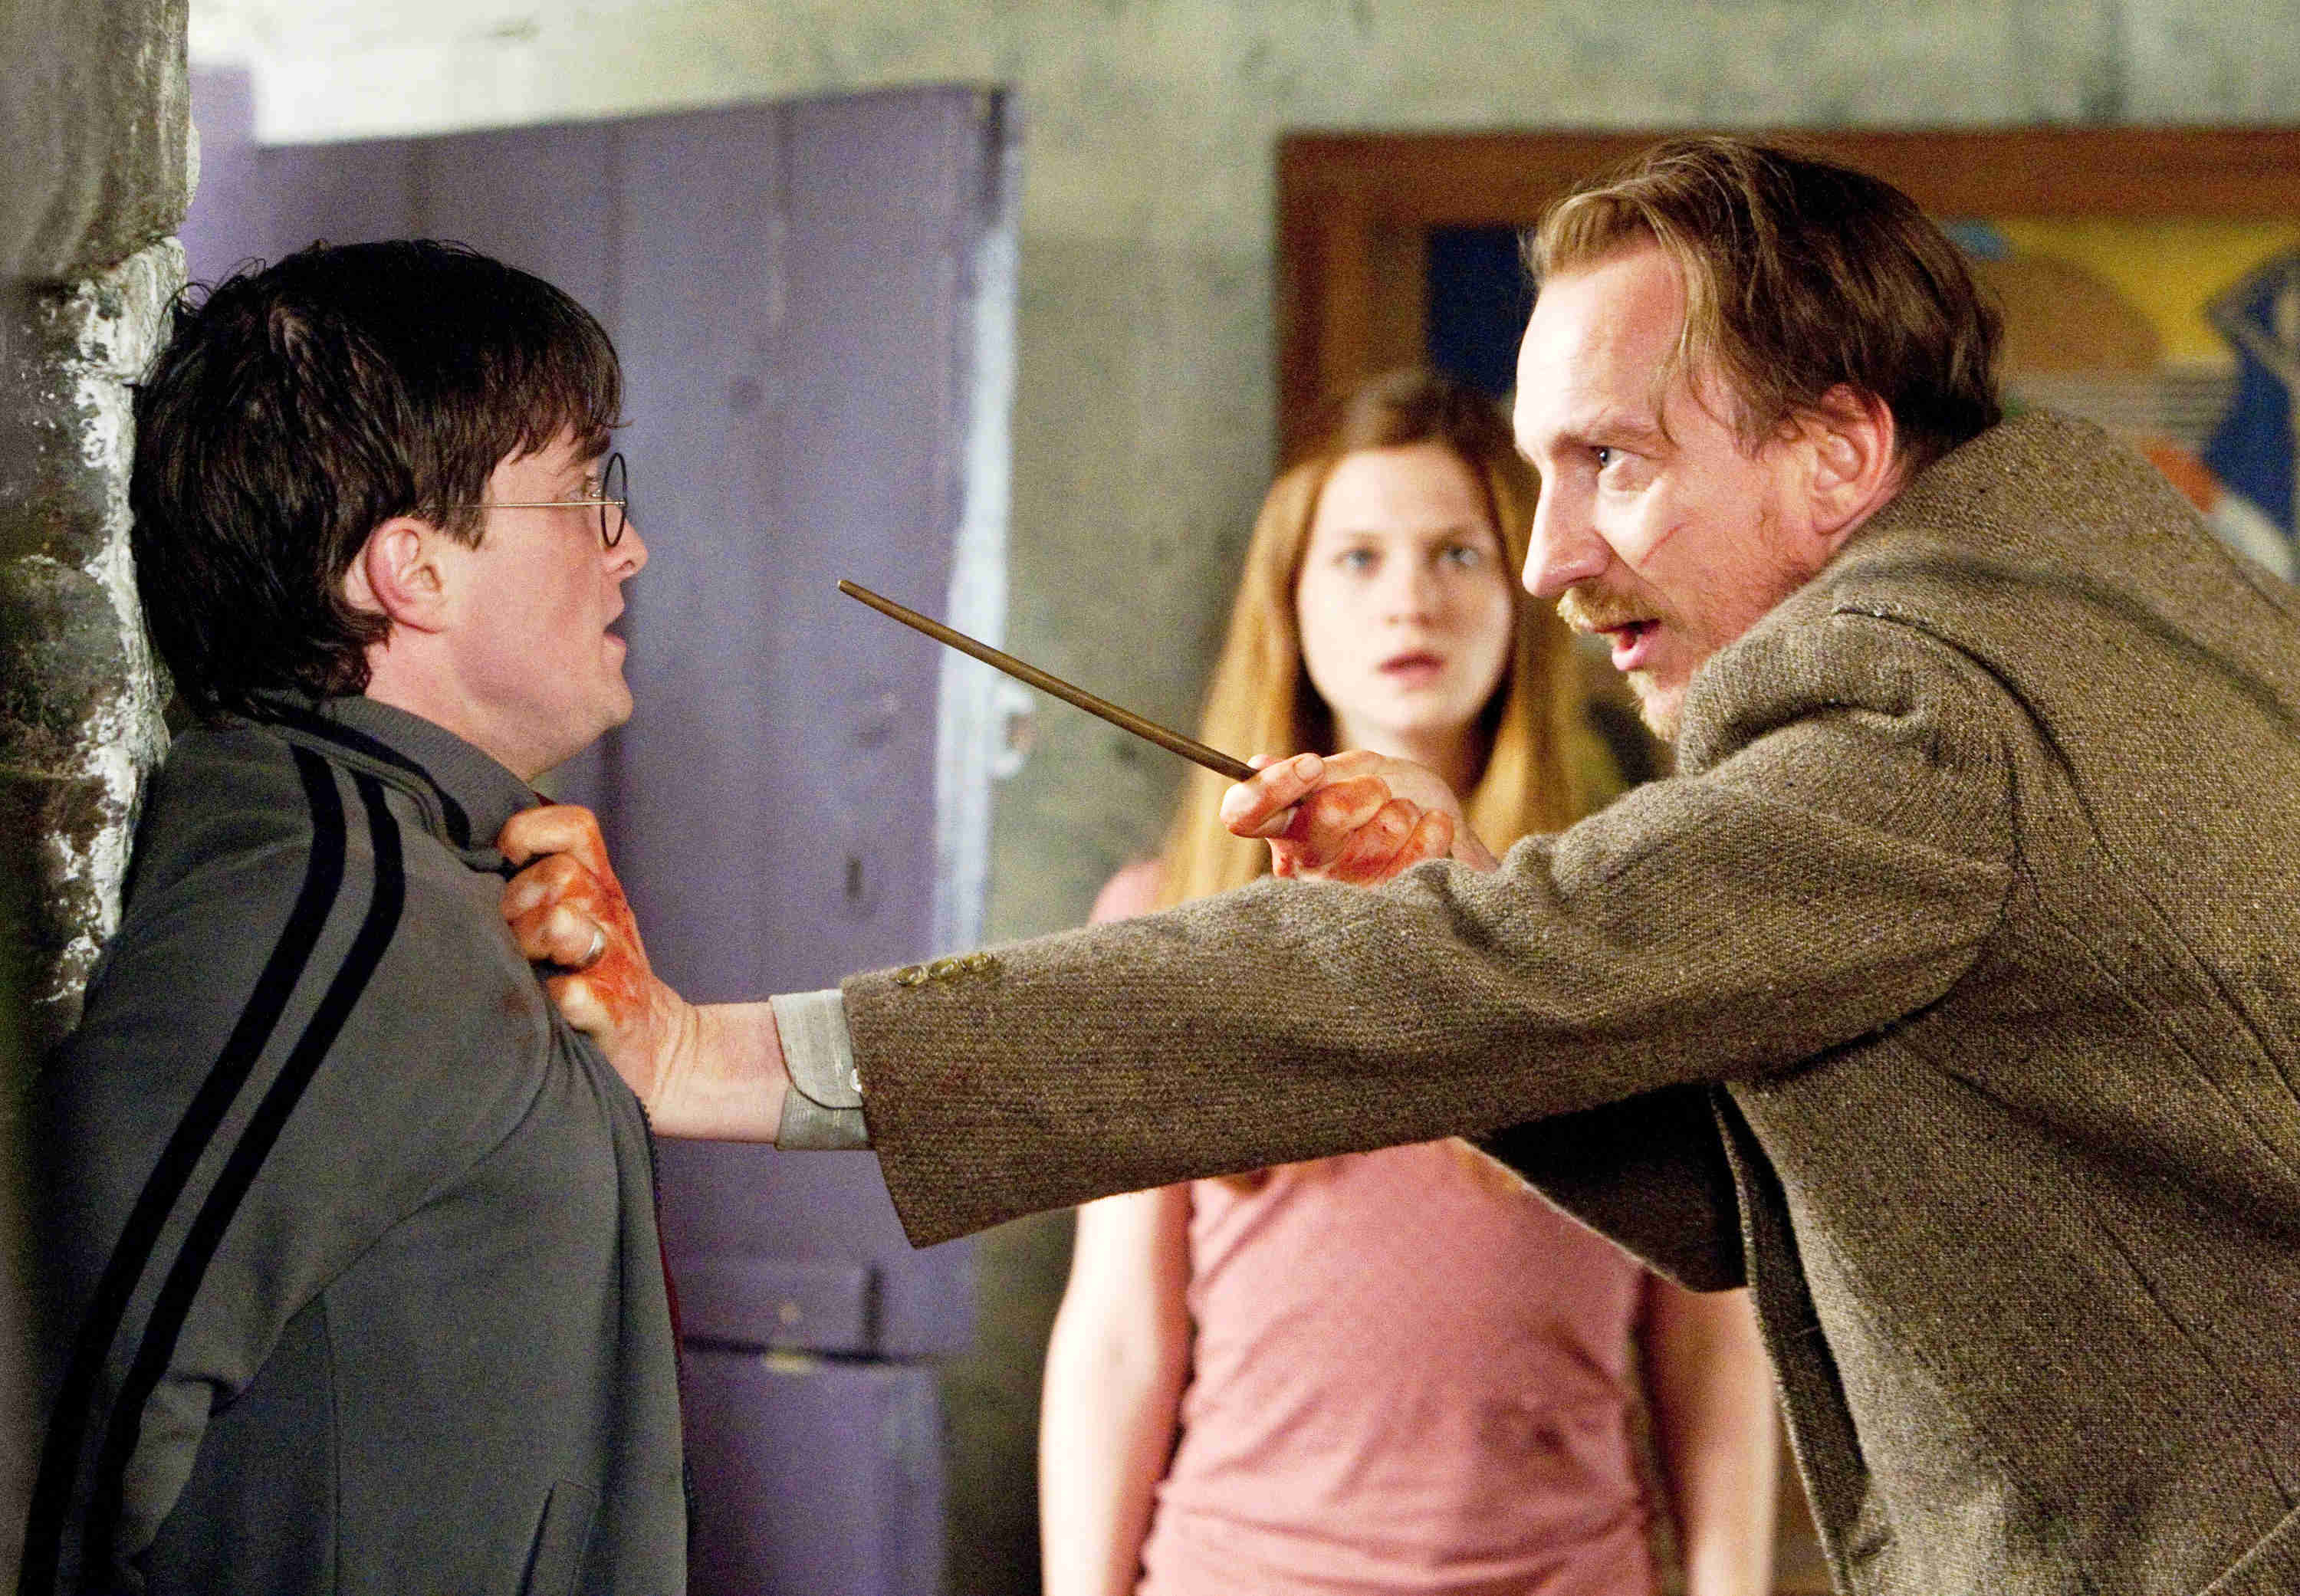 Daniel Radcliffe, David Thewlis and Bonnie Wright in Warner Bros. Pictures' Harry Potter and the Deathly Hallows: Part I (2010)